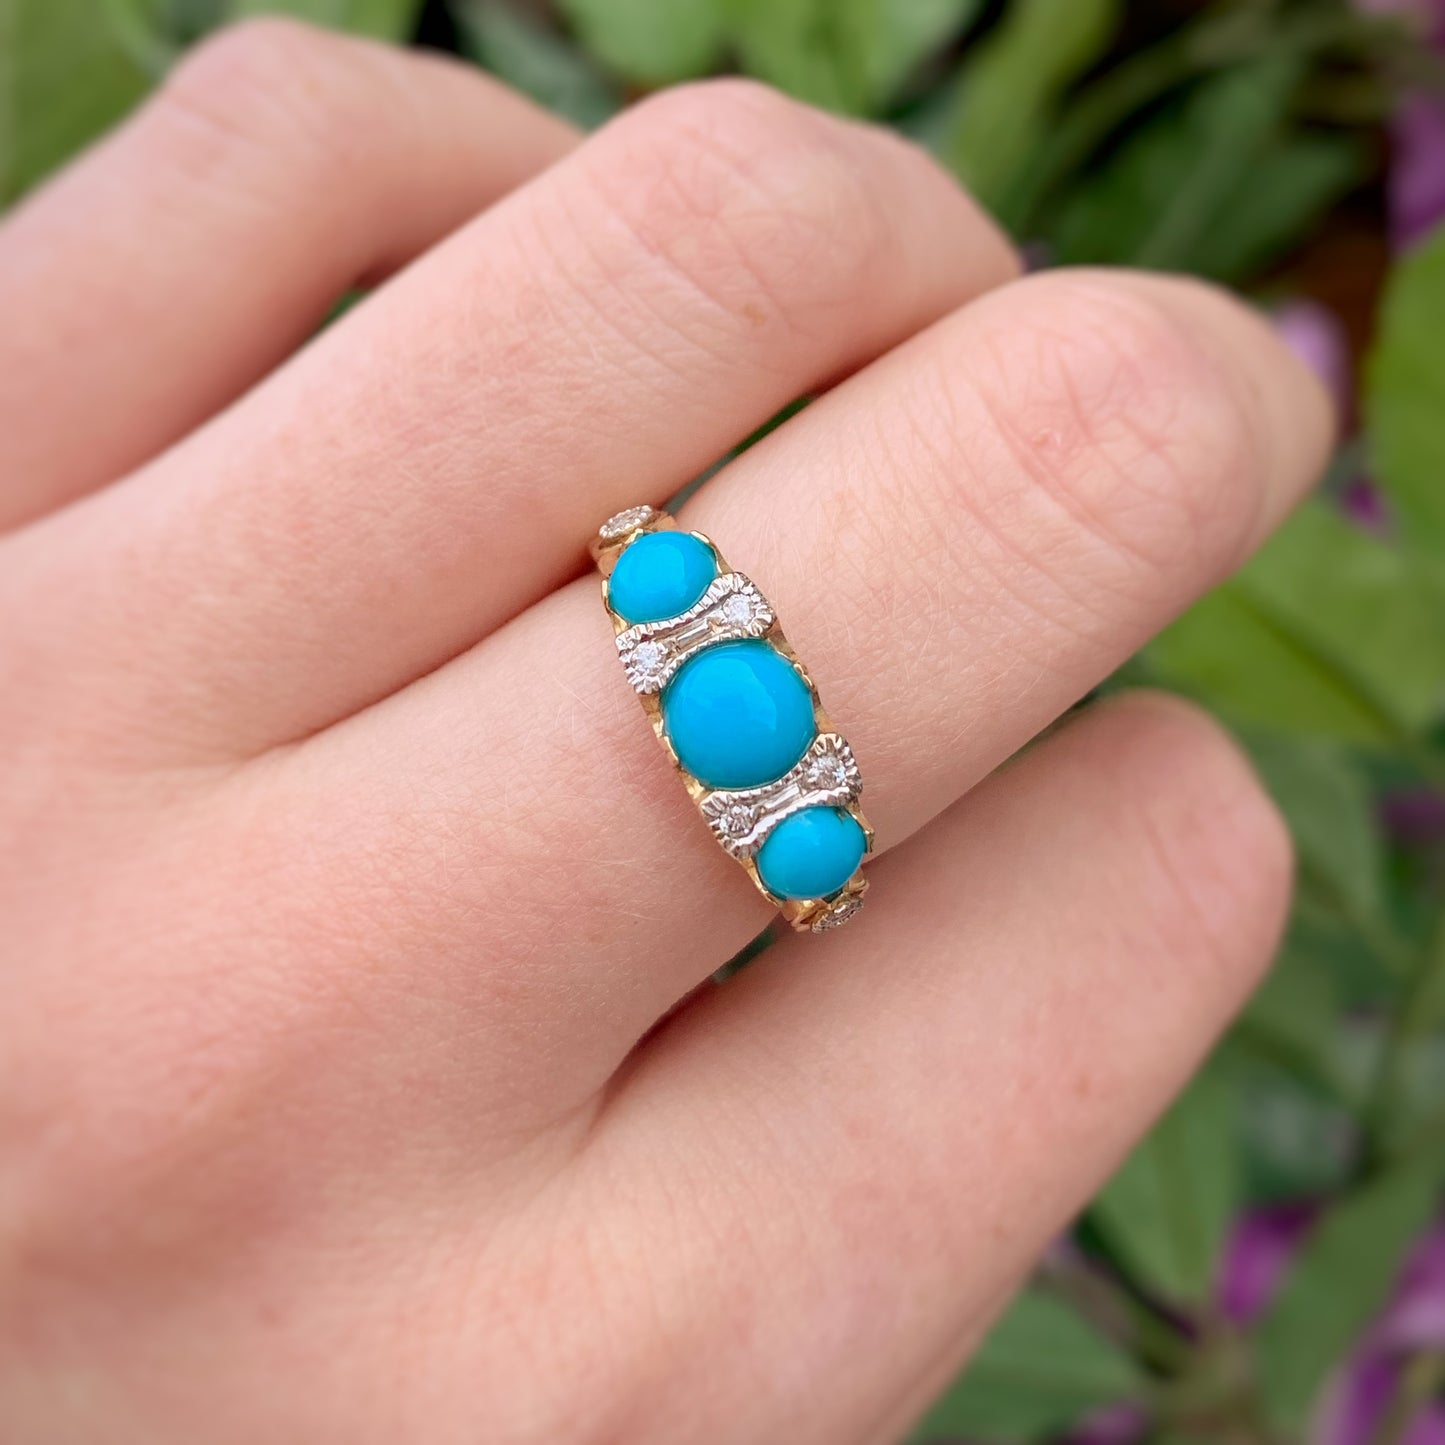 Edwardian Inspired 9ct Yellow Gold Turquoise and Diamond Ring - SIZE M 1/2